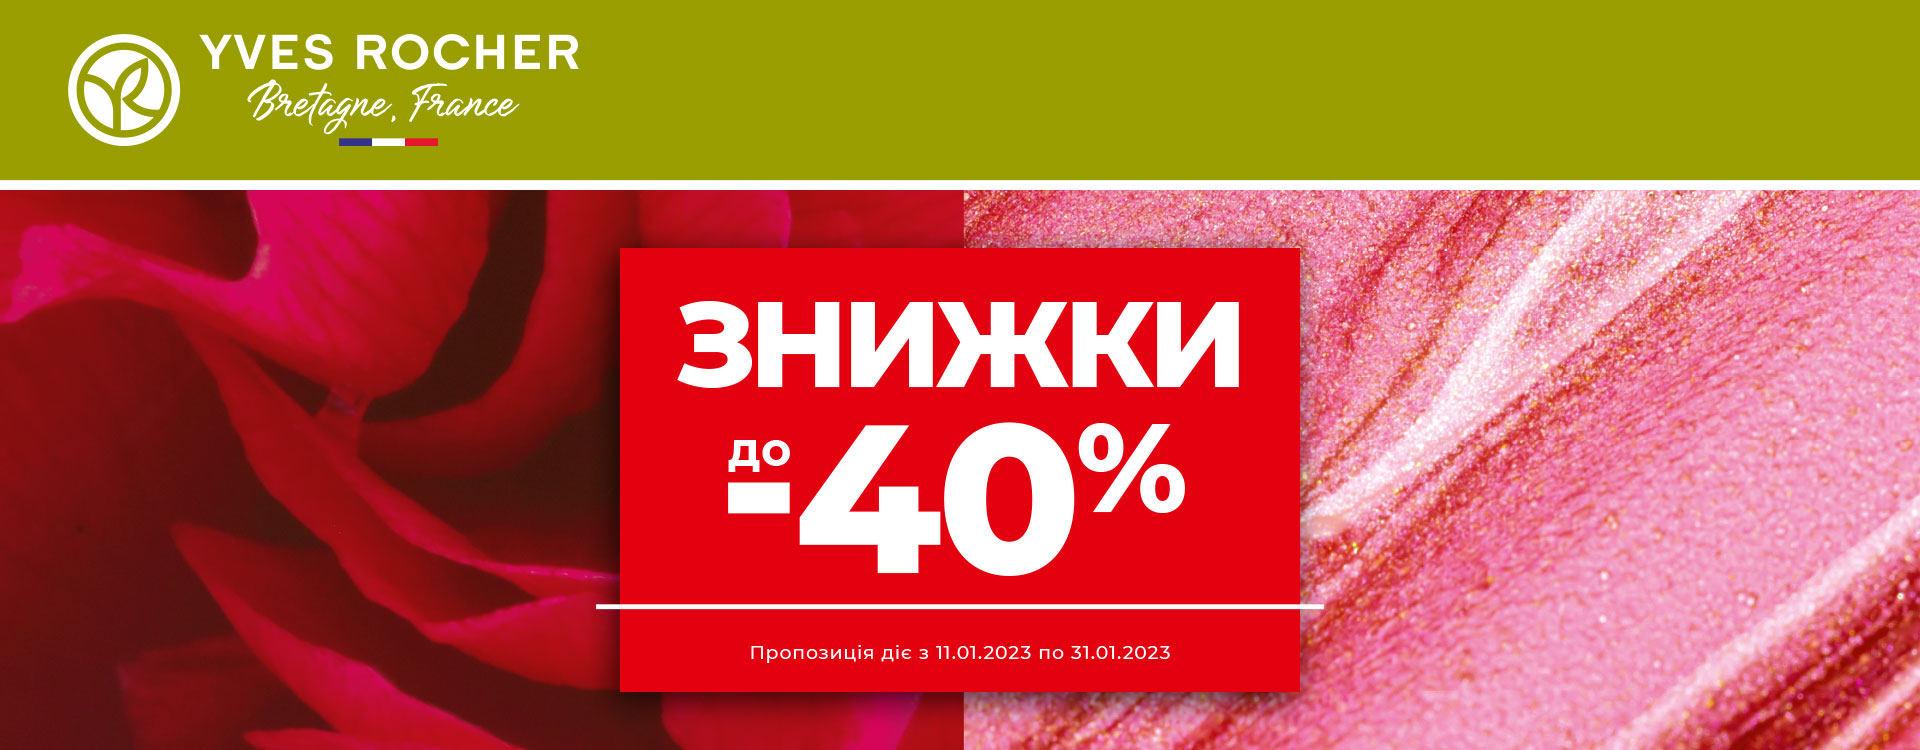 Winter sale up to -40% at Yves Rocher